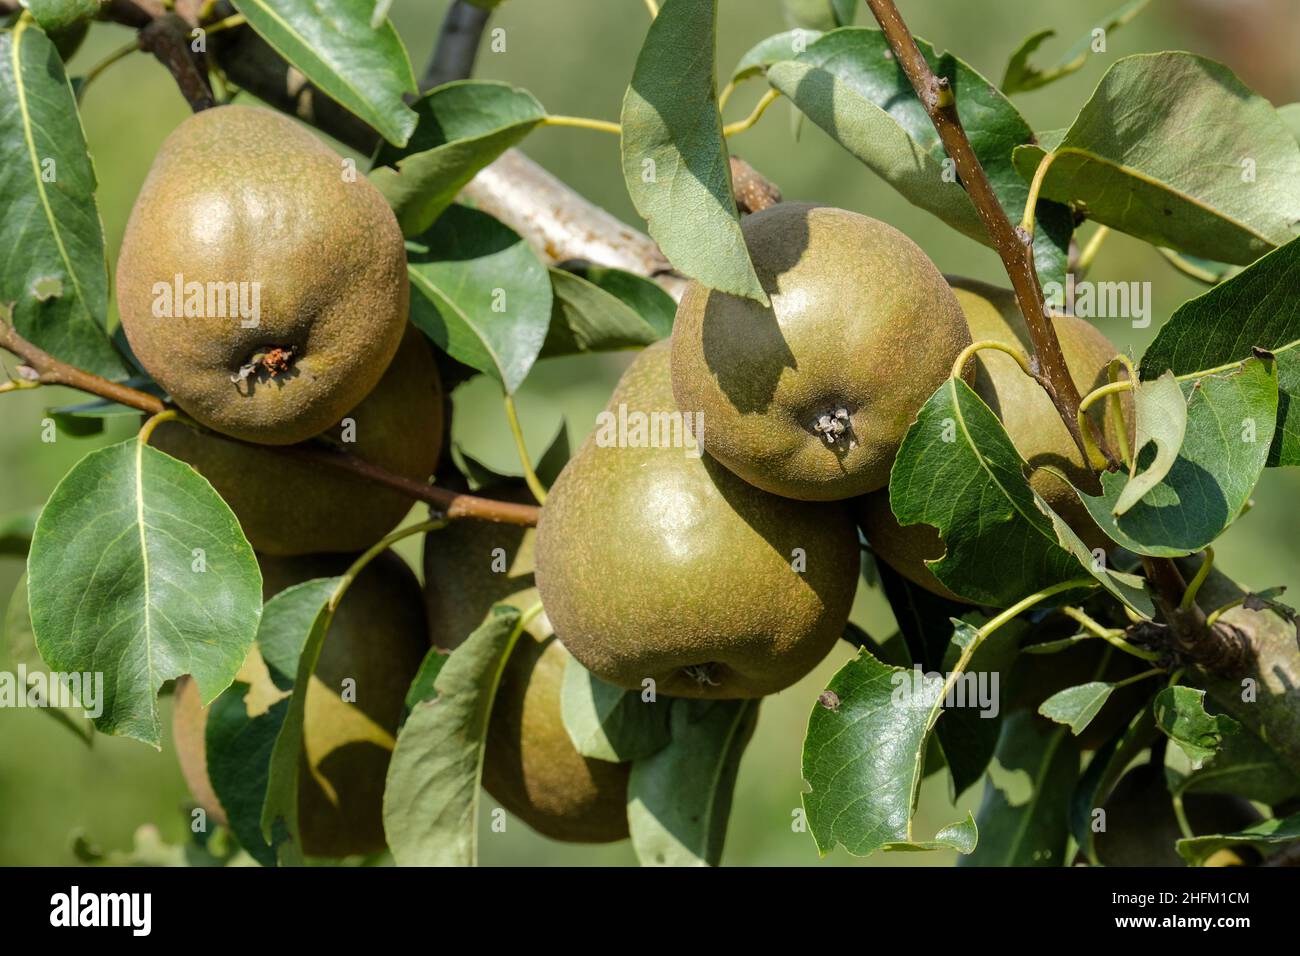 Pyrus communis 'Beurre Hardy', pear 'Beurre Hardy'. Ripe fruit growing on a tree Stock Photo